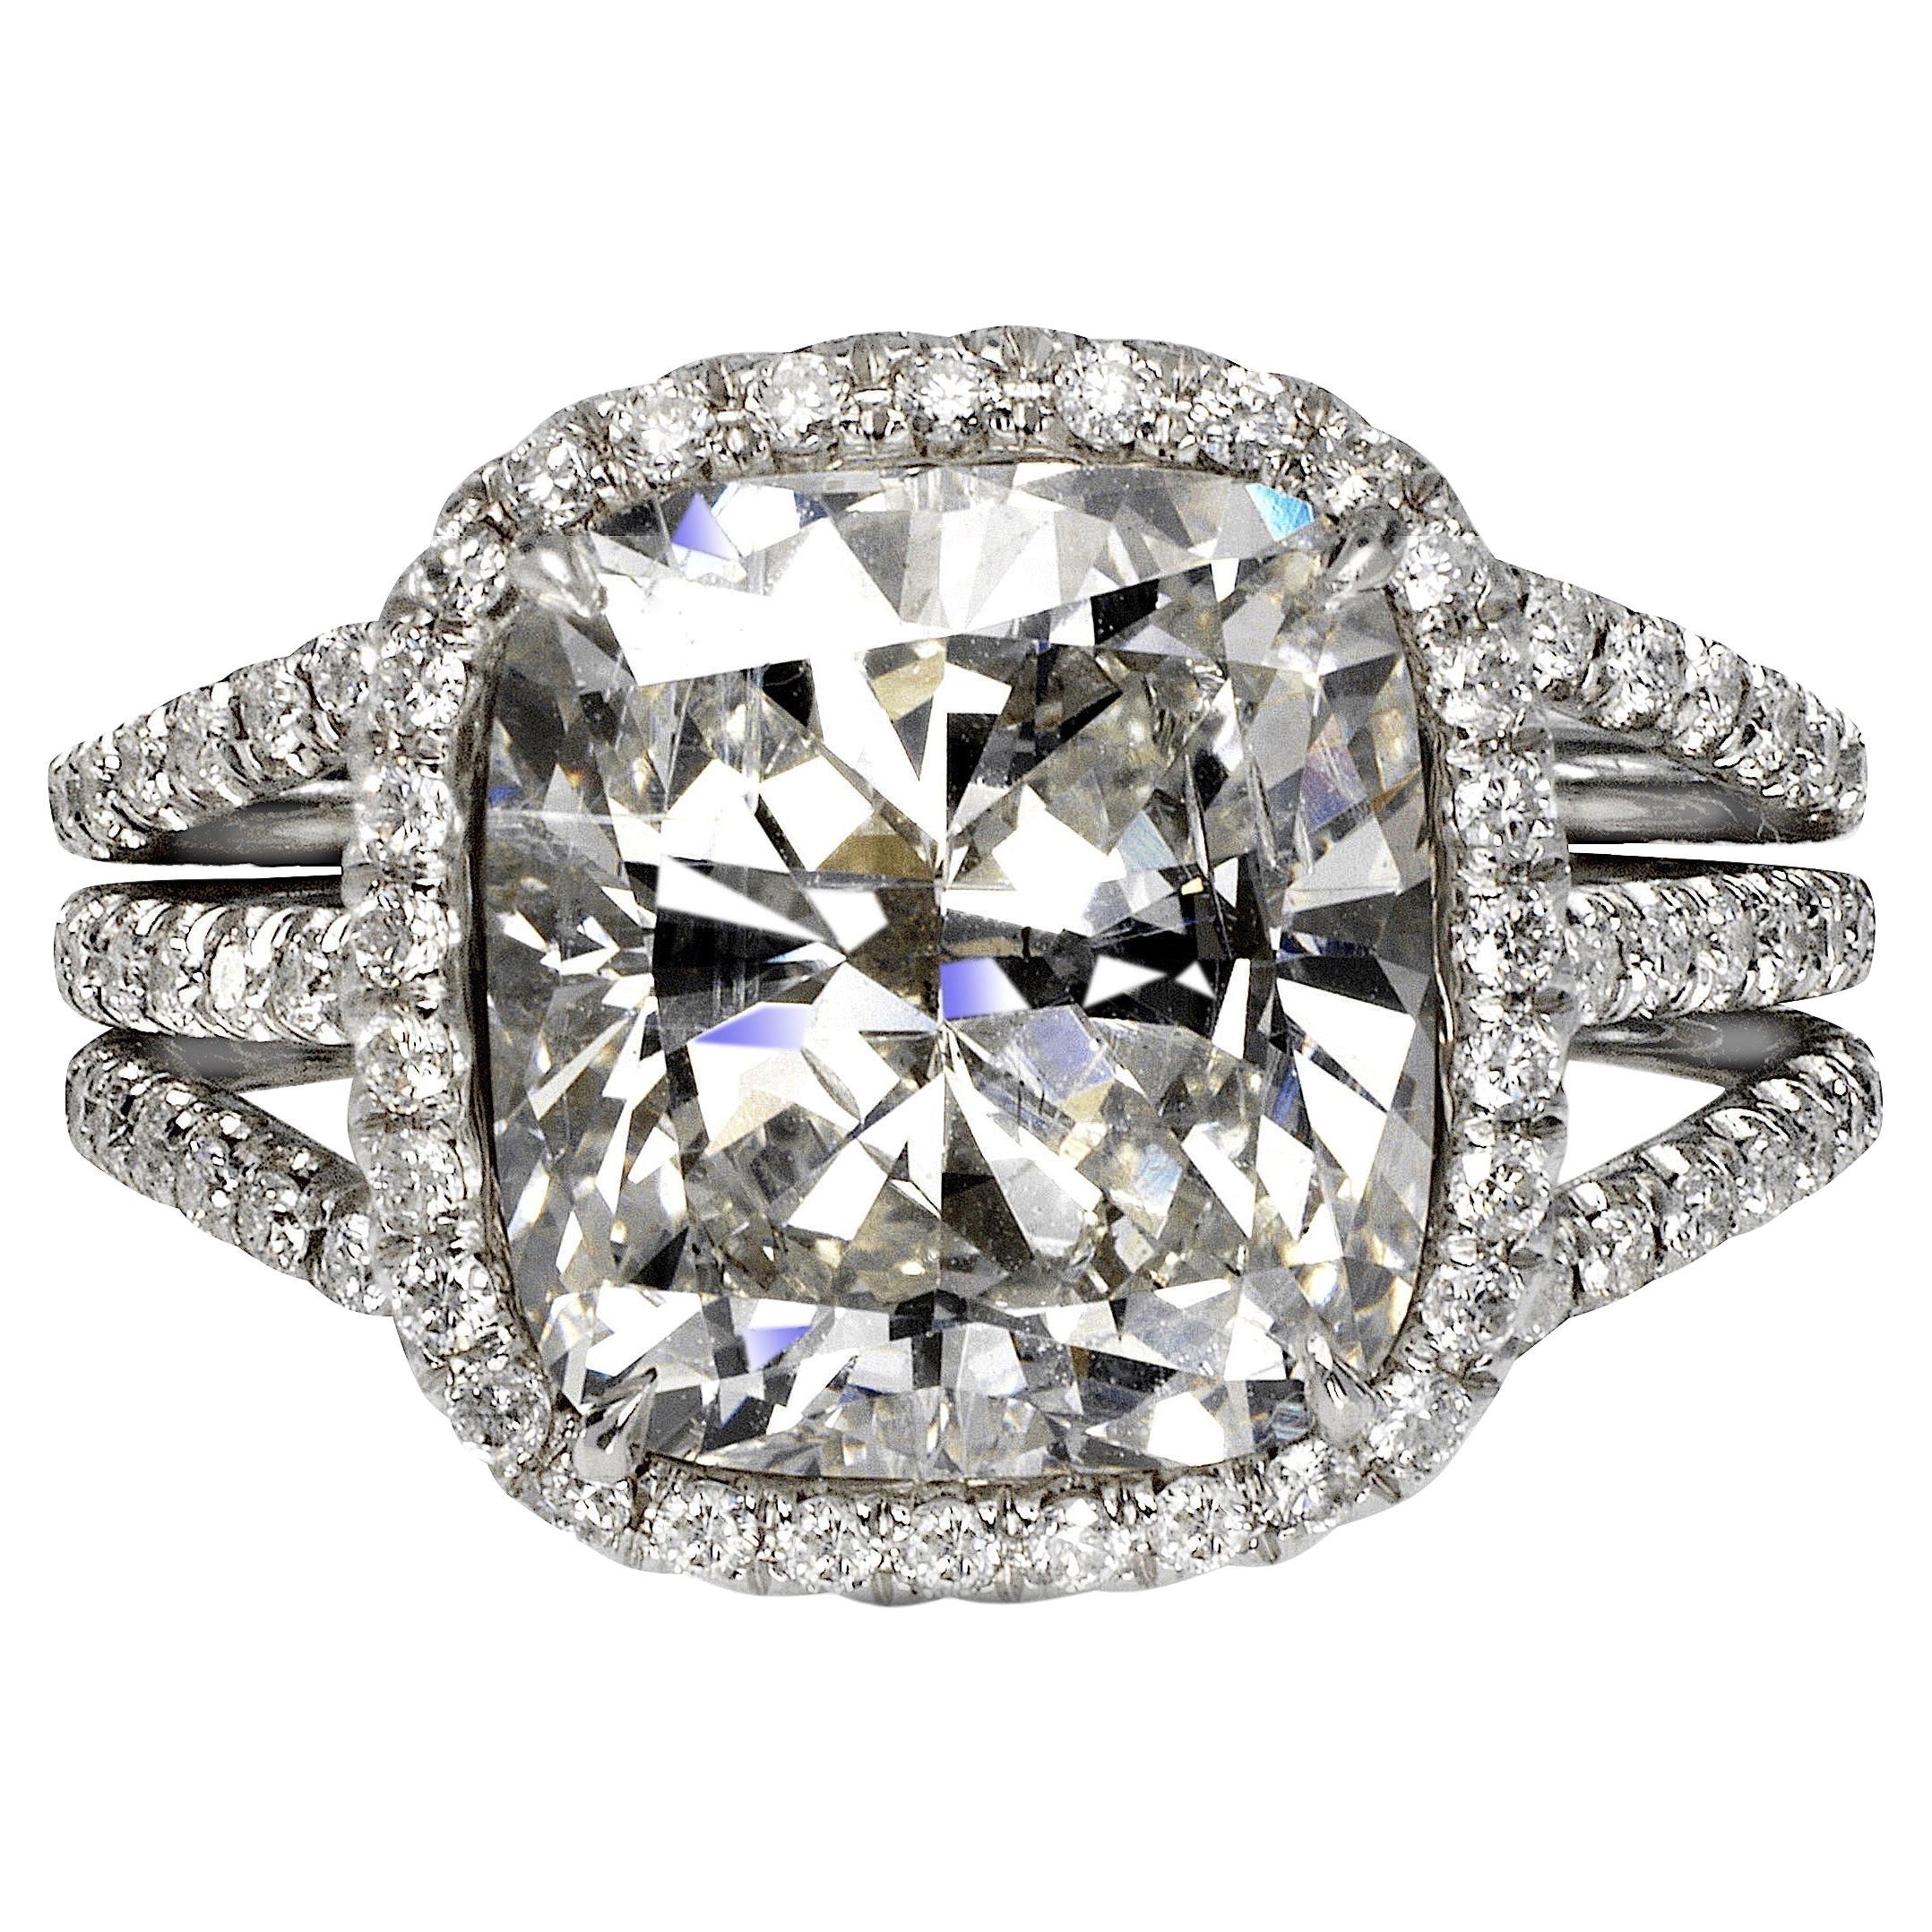 7 Carat Cushion Cut Diamond Engagement Ring Certified F VS2 For Sale